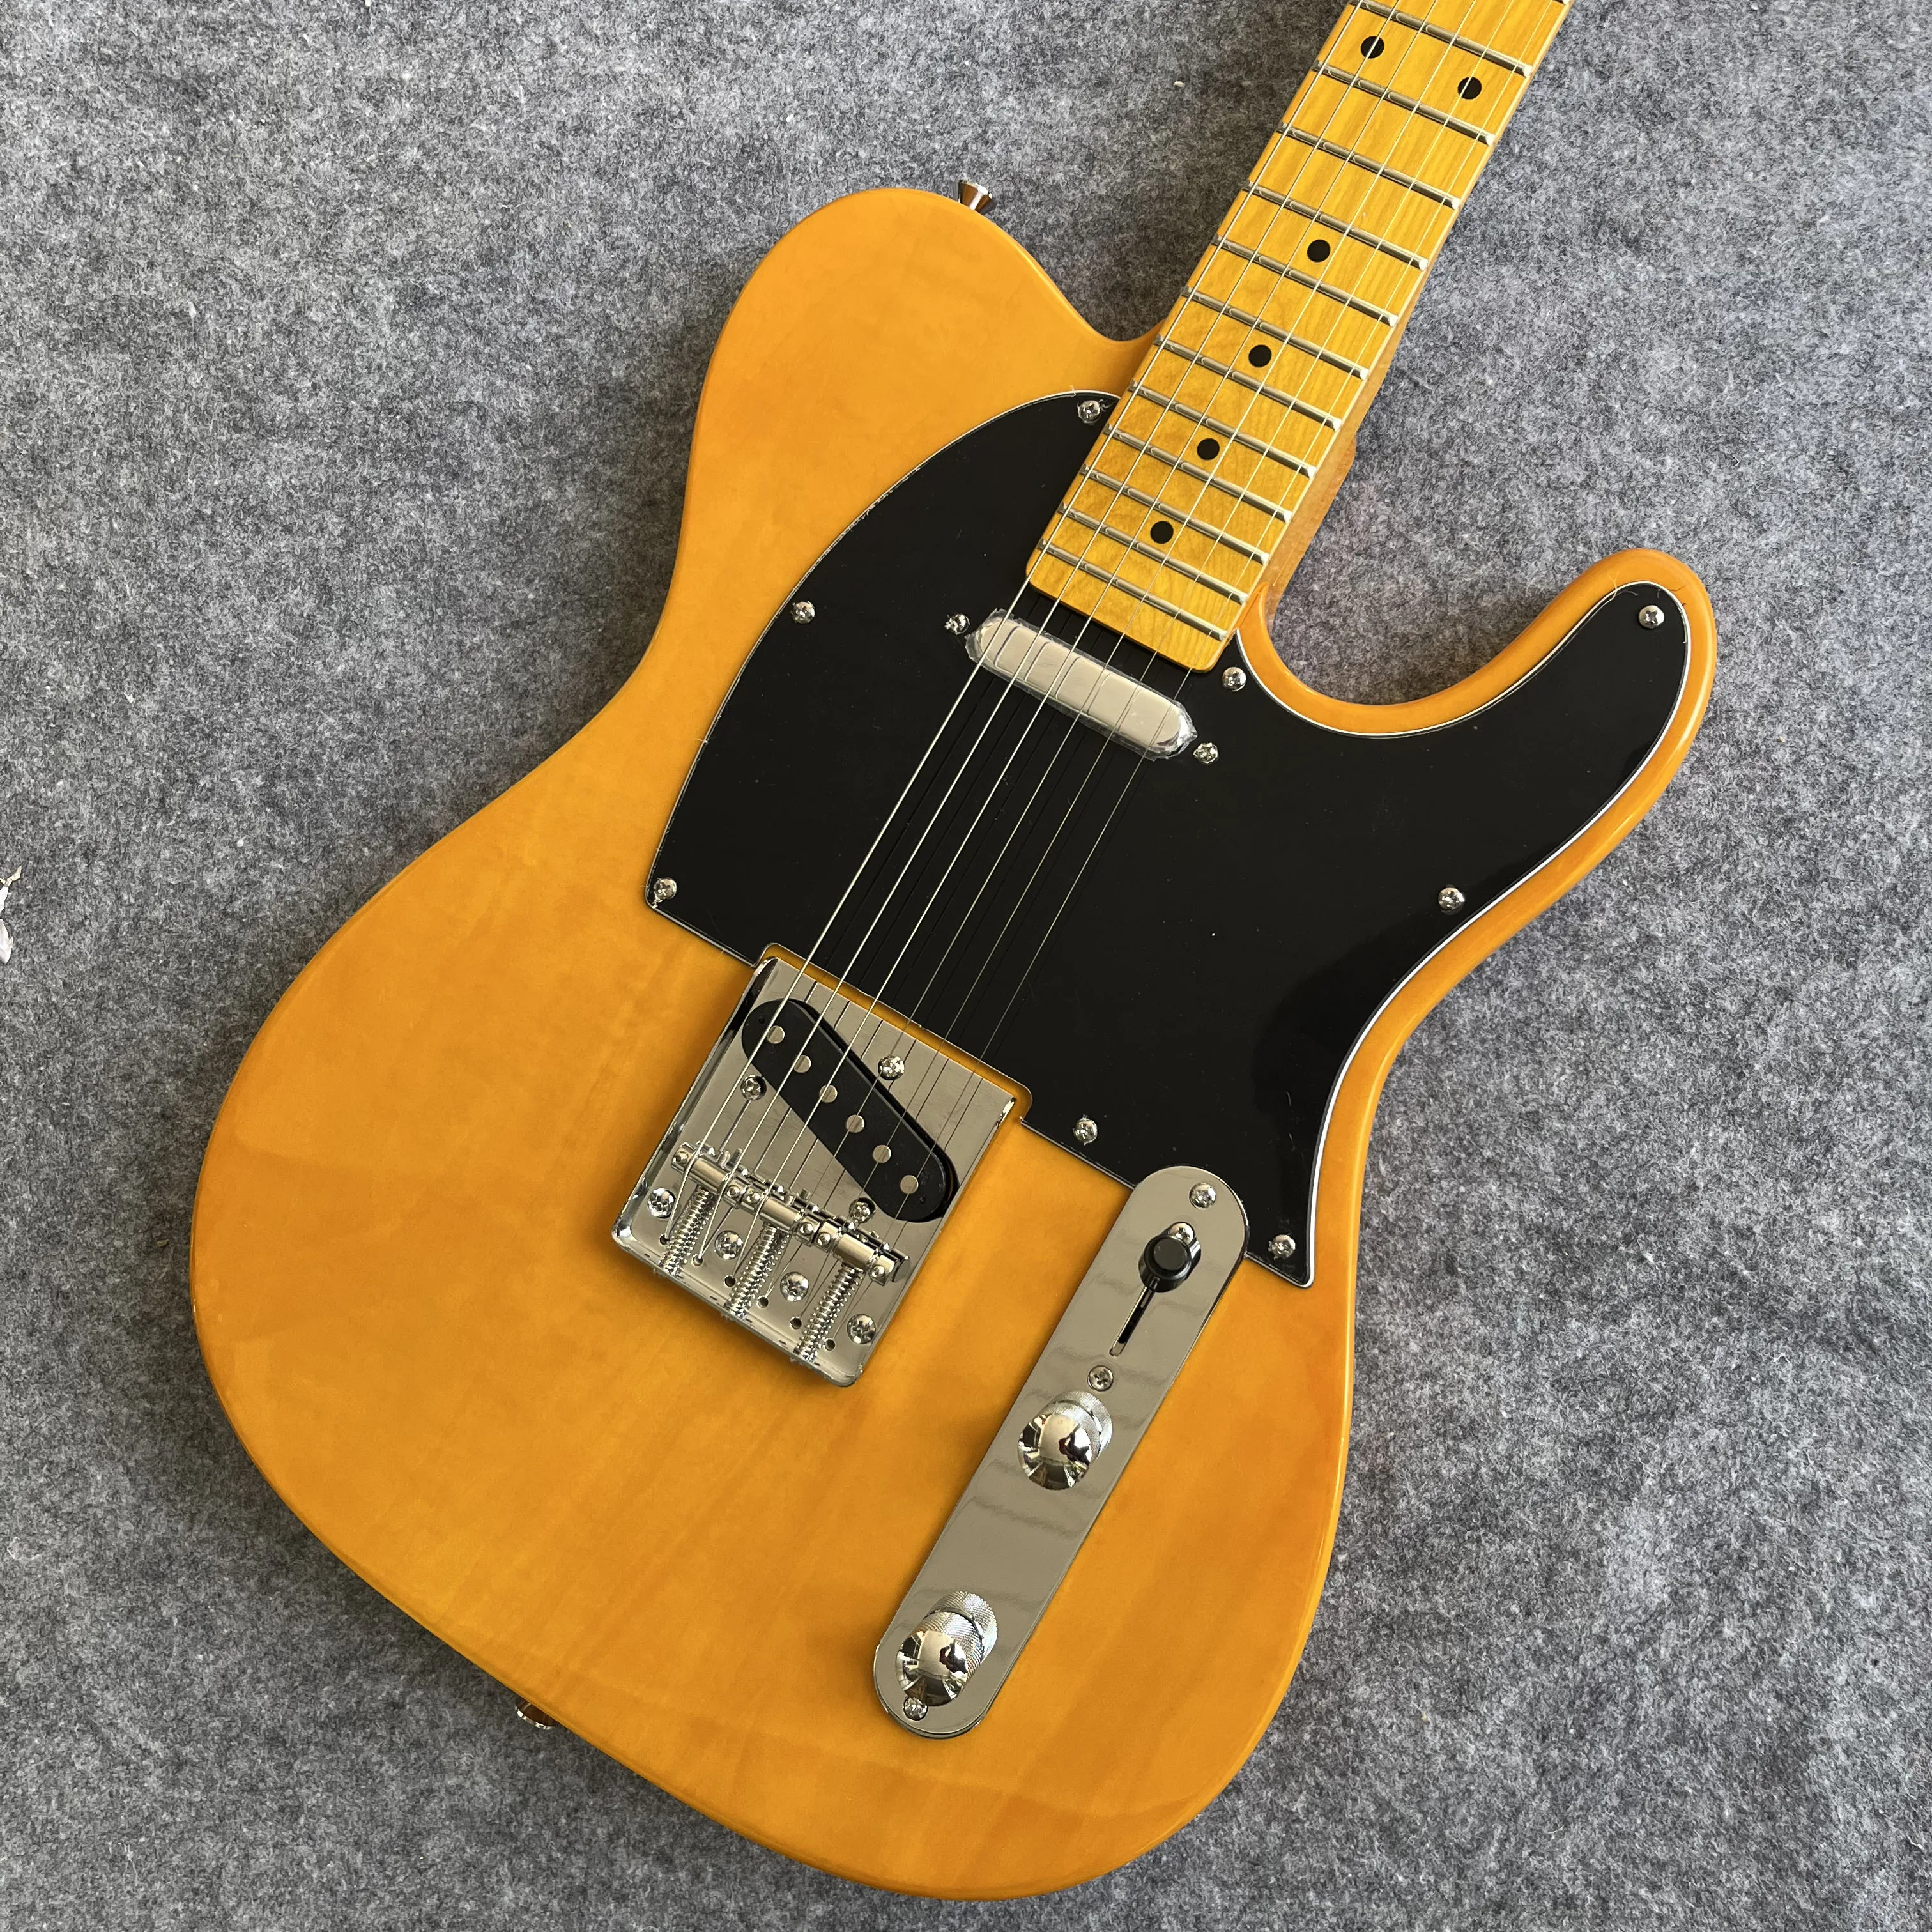 

High Quality Customized 6 String Gloss Clear Yellow Electric Guitar Basswood Body Maple Neck Vintage Guitarra Beautiful Vioce